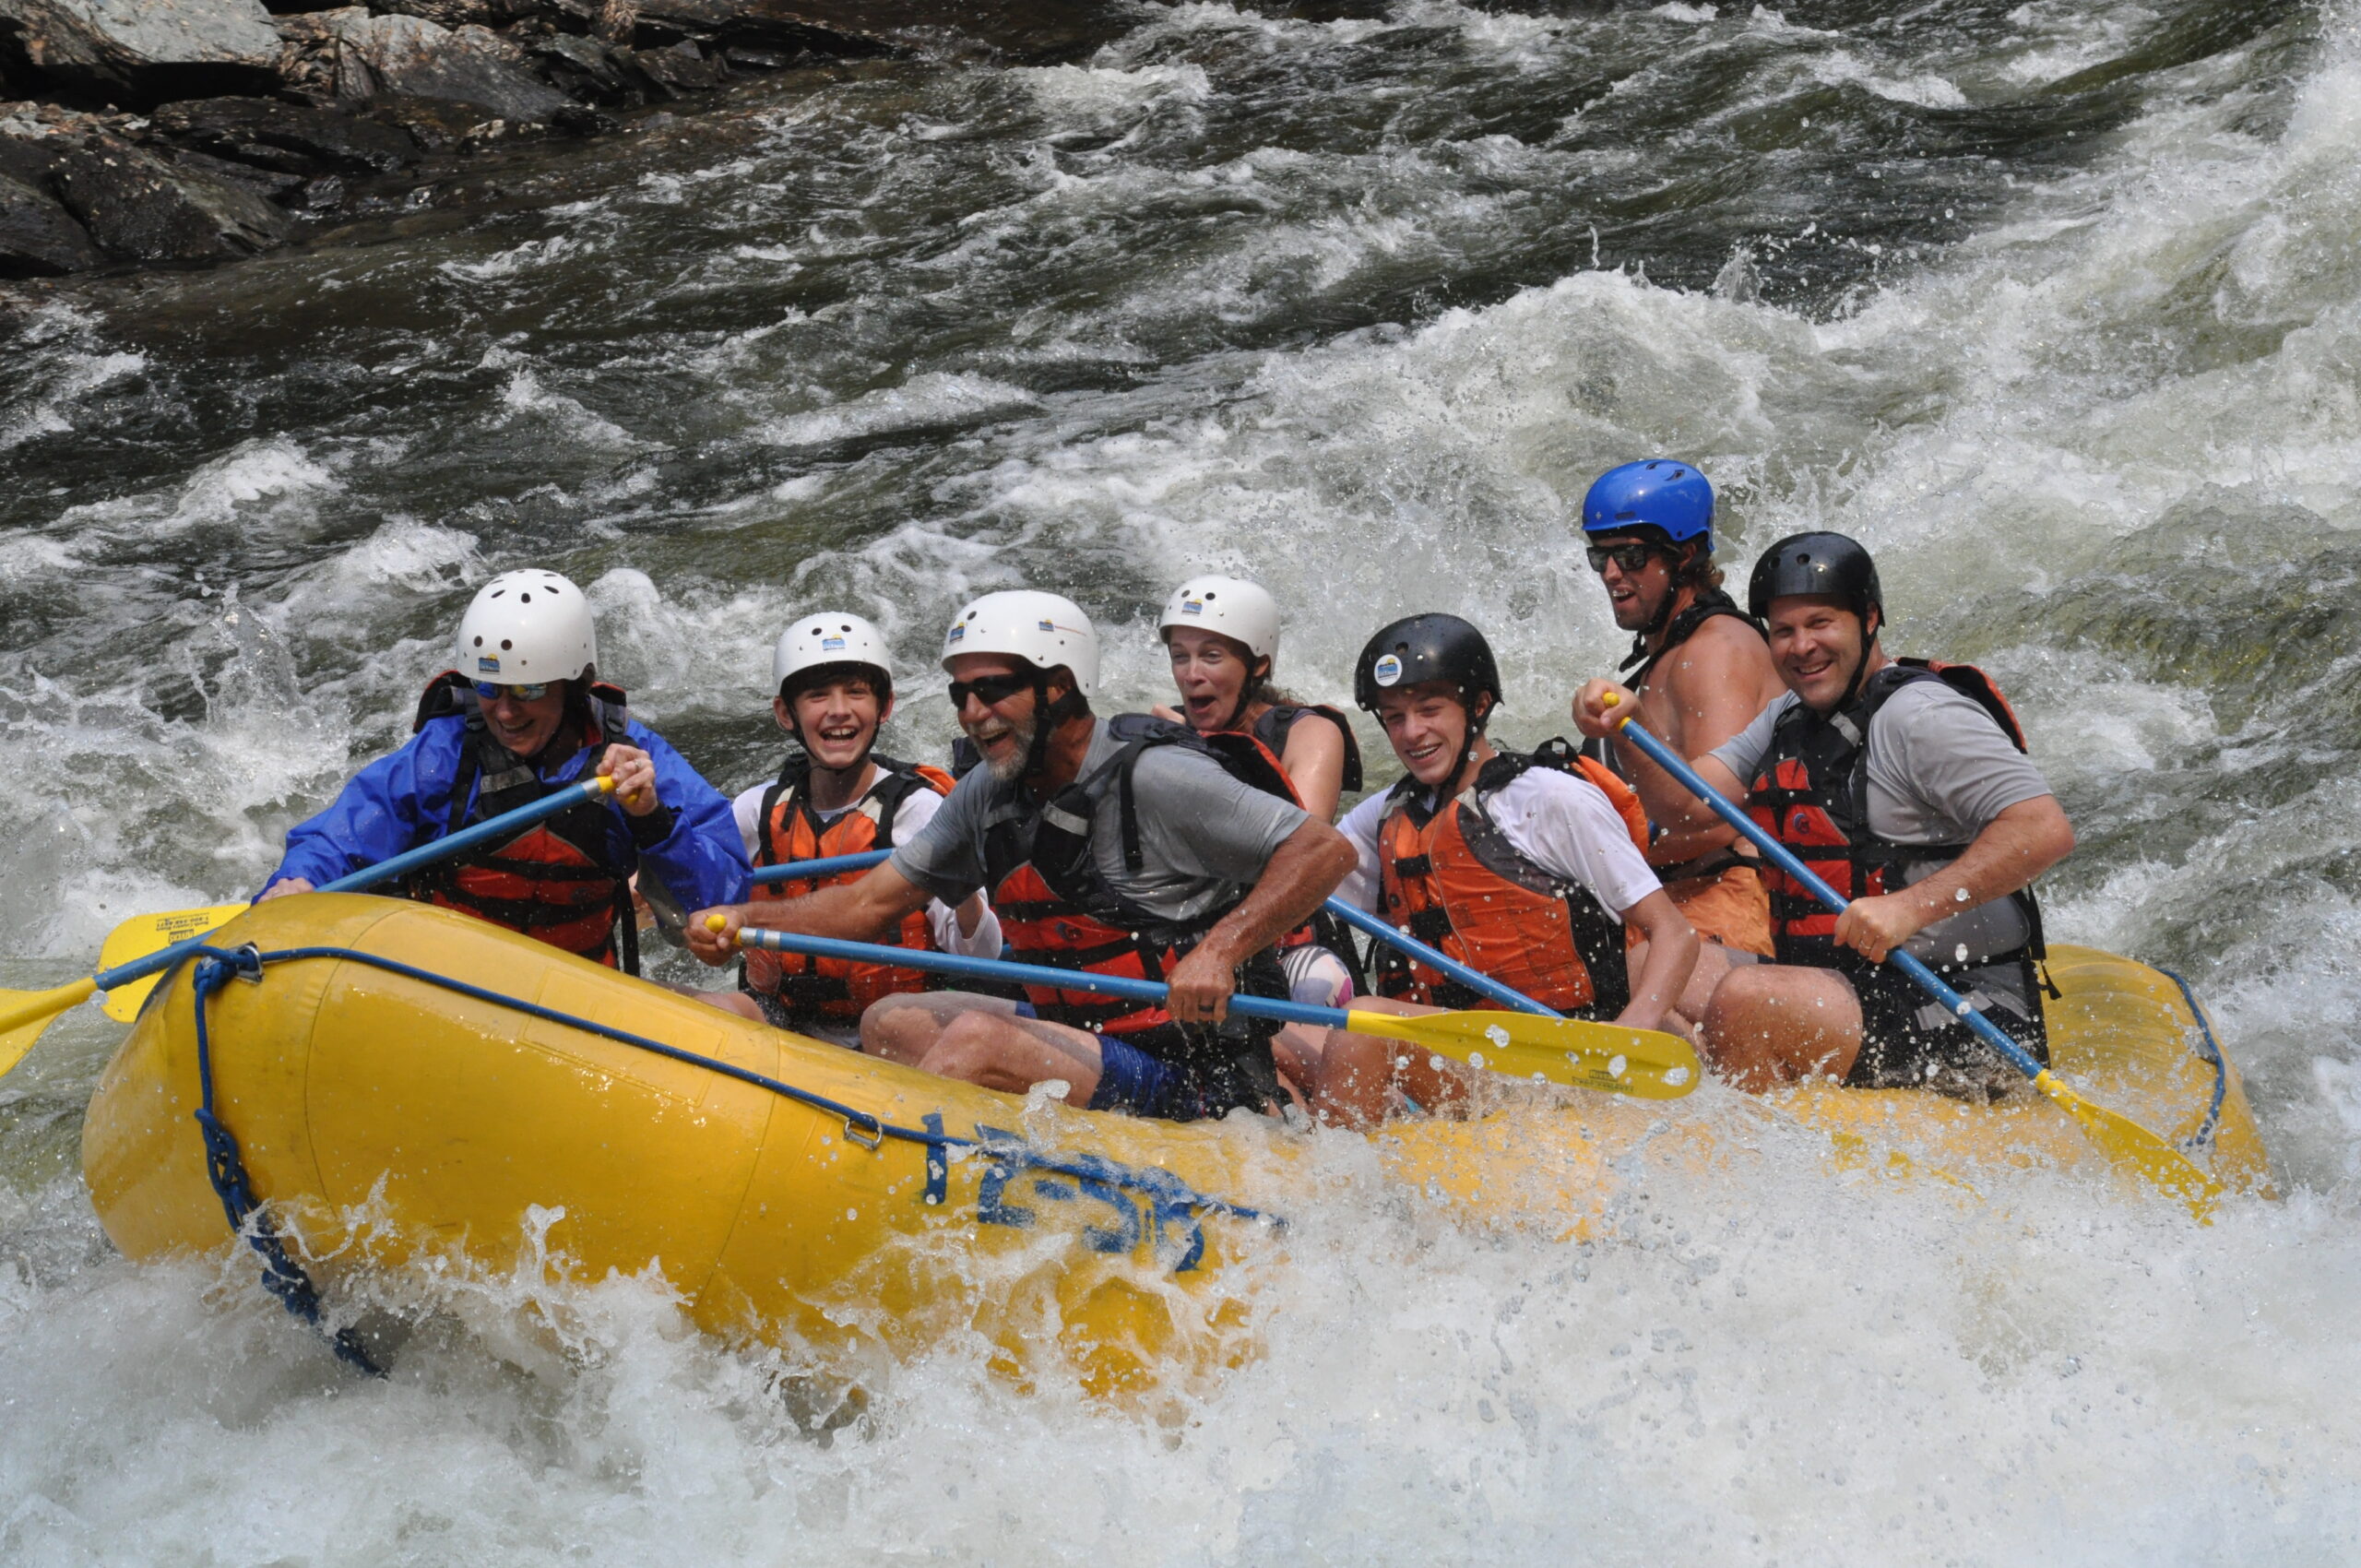 What Is a Turbine Test? And Why Is It So Much Fun for White Water Rafting?